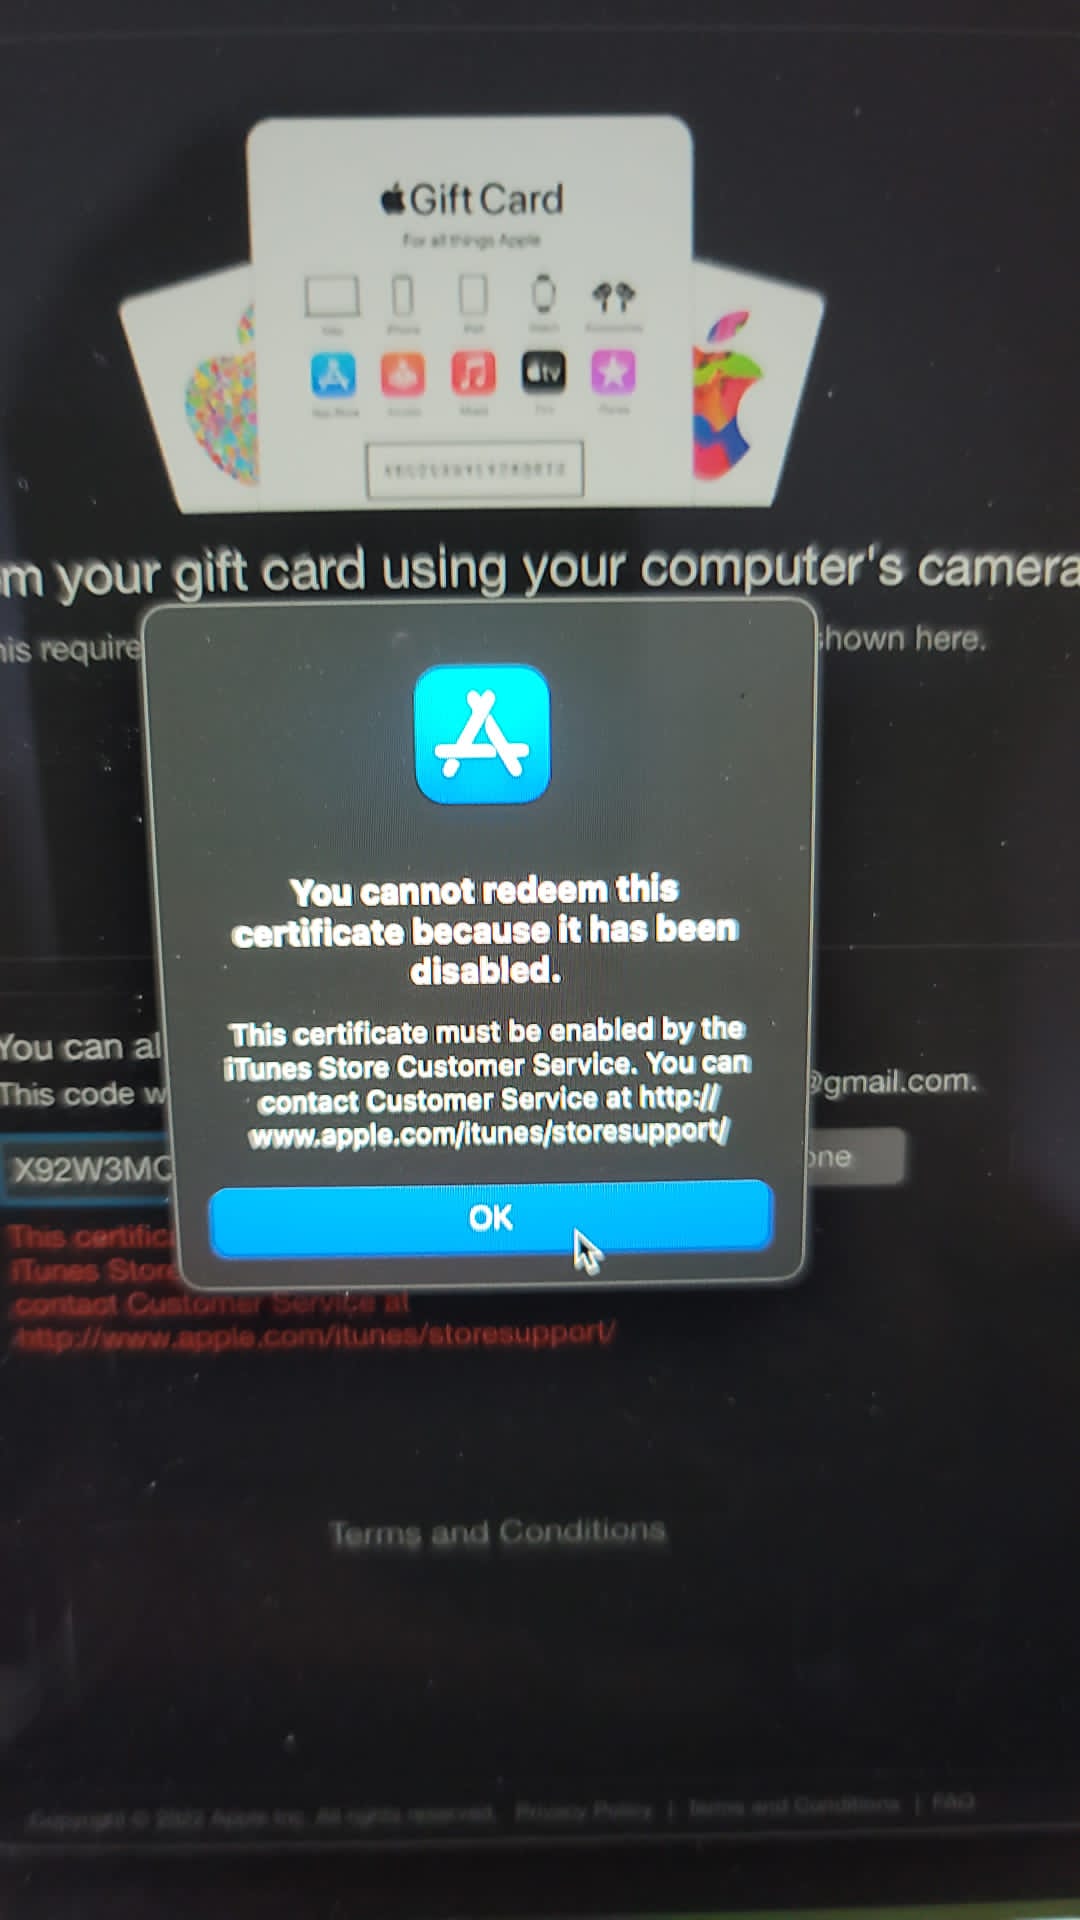 Gift card is not applicable - Apple Community